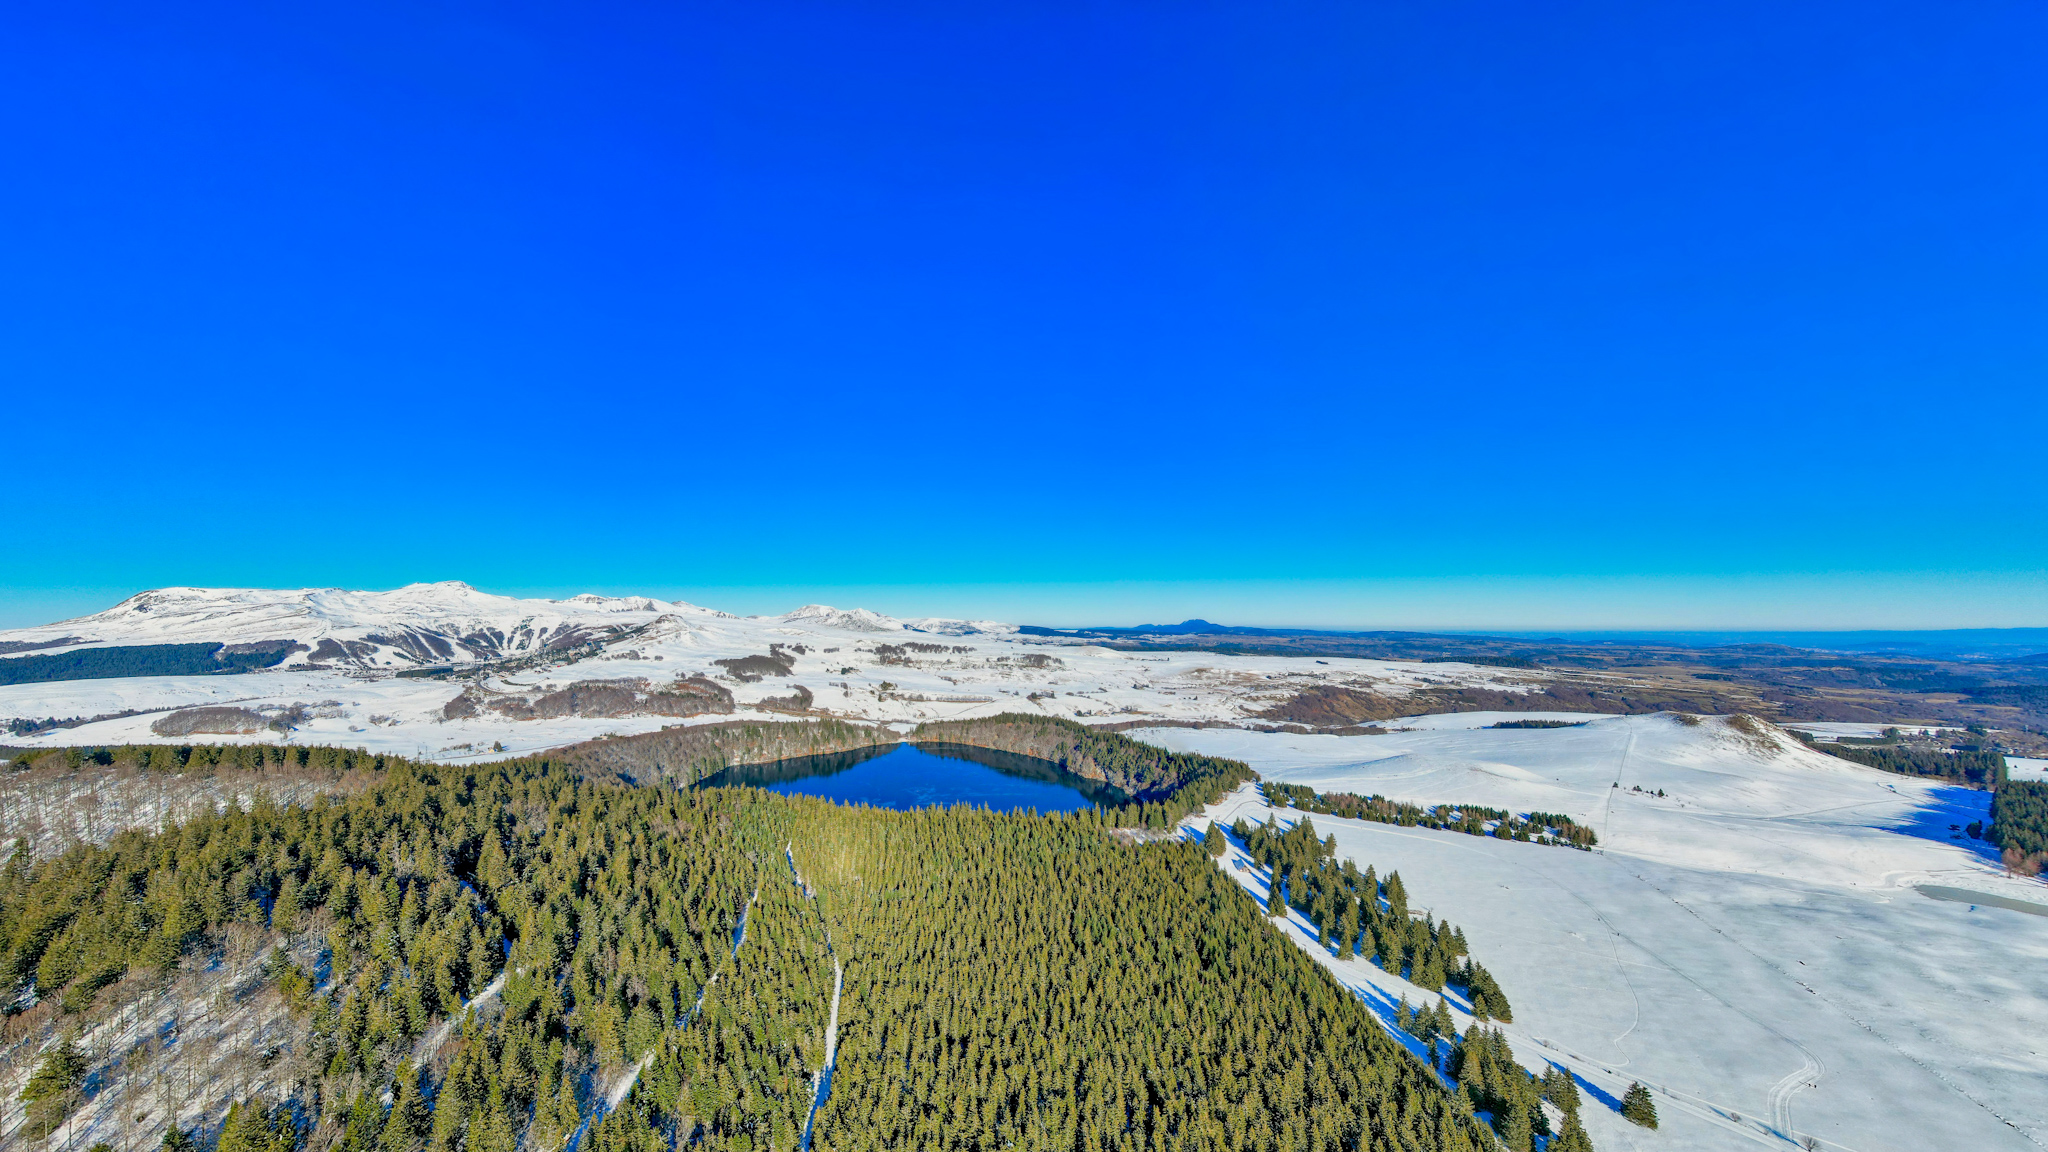 Above Lac Pavin, view. on the Massif du Sancy and the winter sports resort of Super Besse